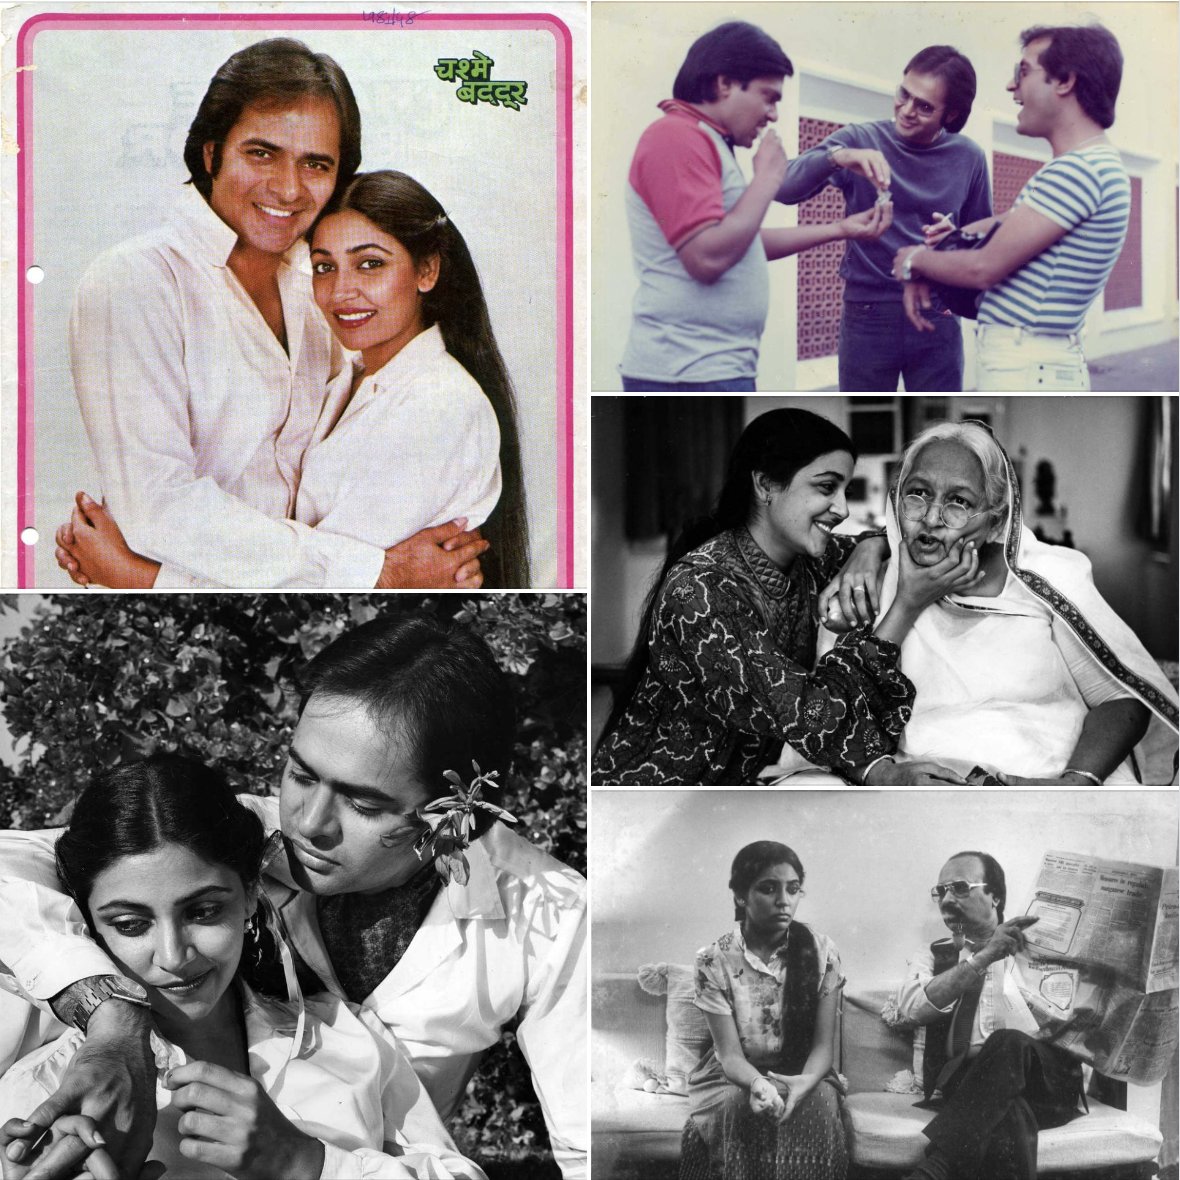 43 Years of #ChashmeBuddoor (08/05/1981) It is a romantic comedy-buddy film starring Farooq Shaikh, Deepti Naval, Rakesh Bedi, Ravi Baswani and Saeed Jaffrey. The film is directed by Sai Paranjpye and produced by Gul Anand and his sister Jayshree Anand — Makhija. The film is